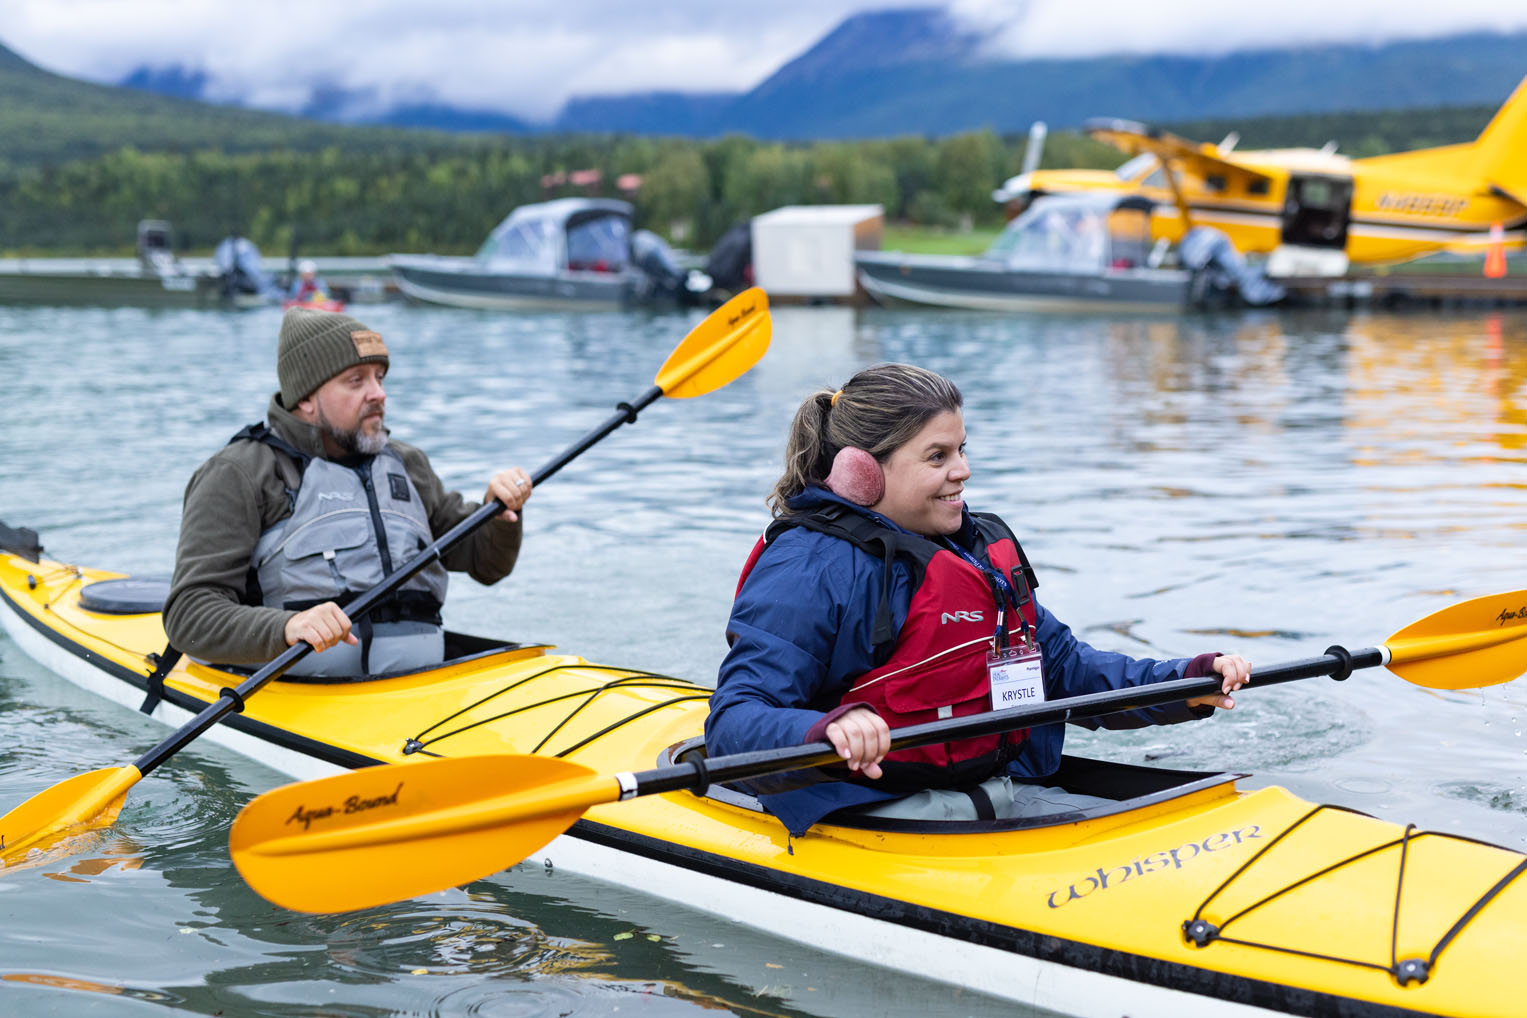 Kayaking on Lake Clark became a marriage lesson itself for the Sizemores.